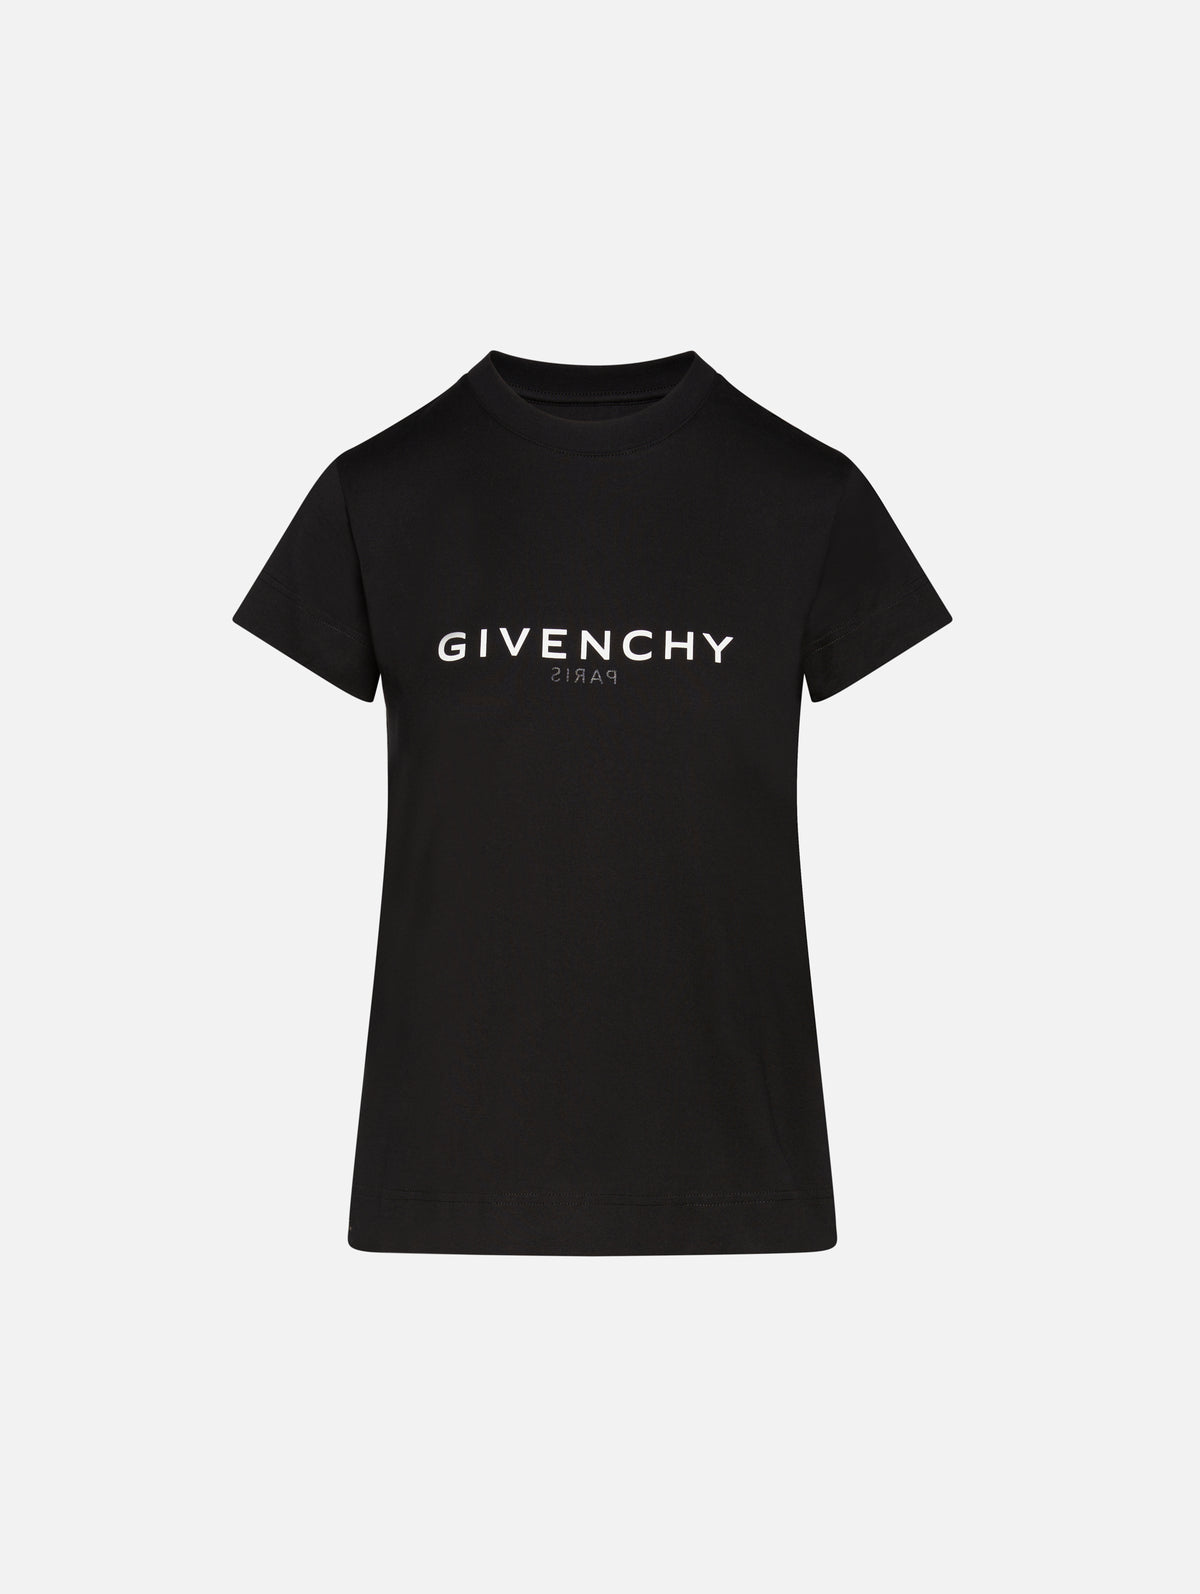 FITTED SHORT SLEEVE T SHIRT | GIVENCHY | ELYSEWALKER